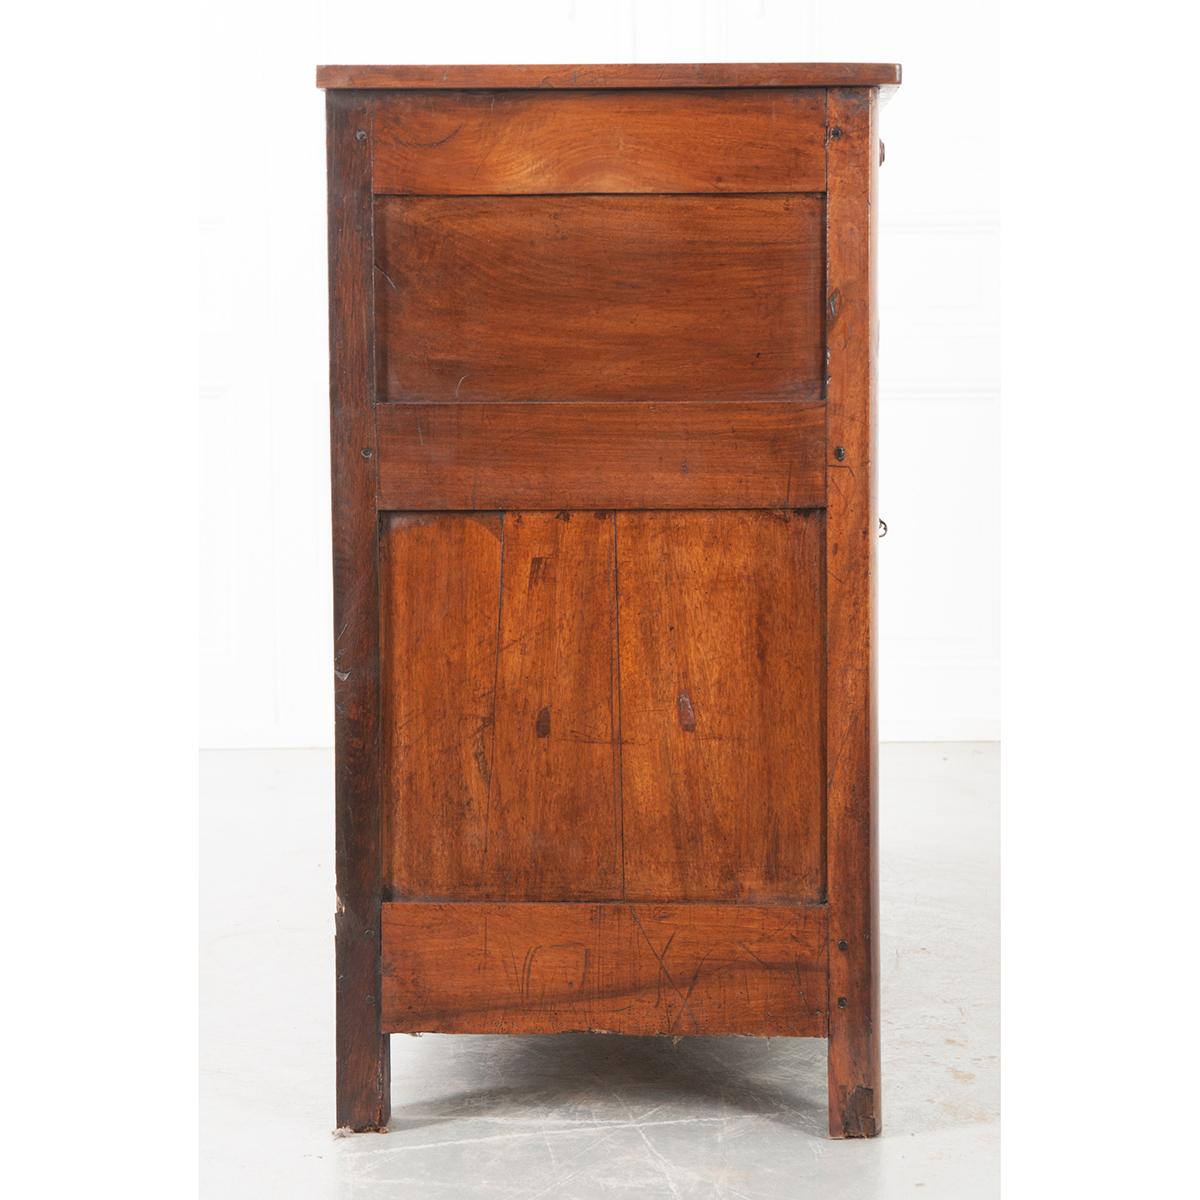 A handsome walnut enfilade, made in France. The case piece has been constructed with simple straight lines. The apron contains three drawers, each with a wood pull. Three paneled doors across the front are equipped with working locks and three keys.